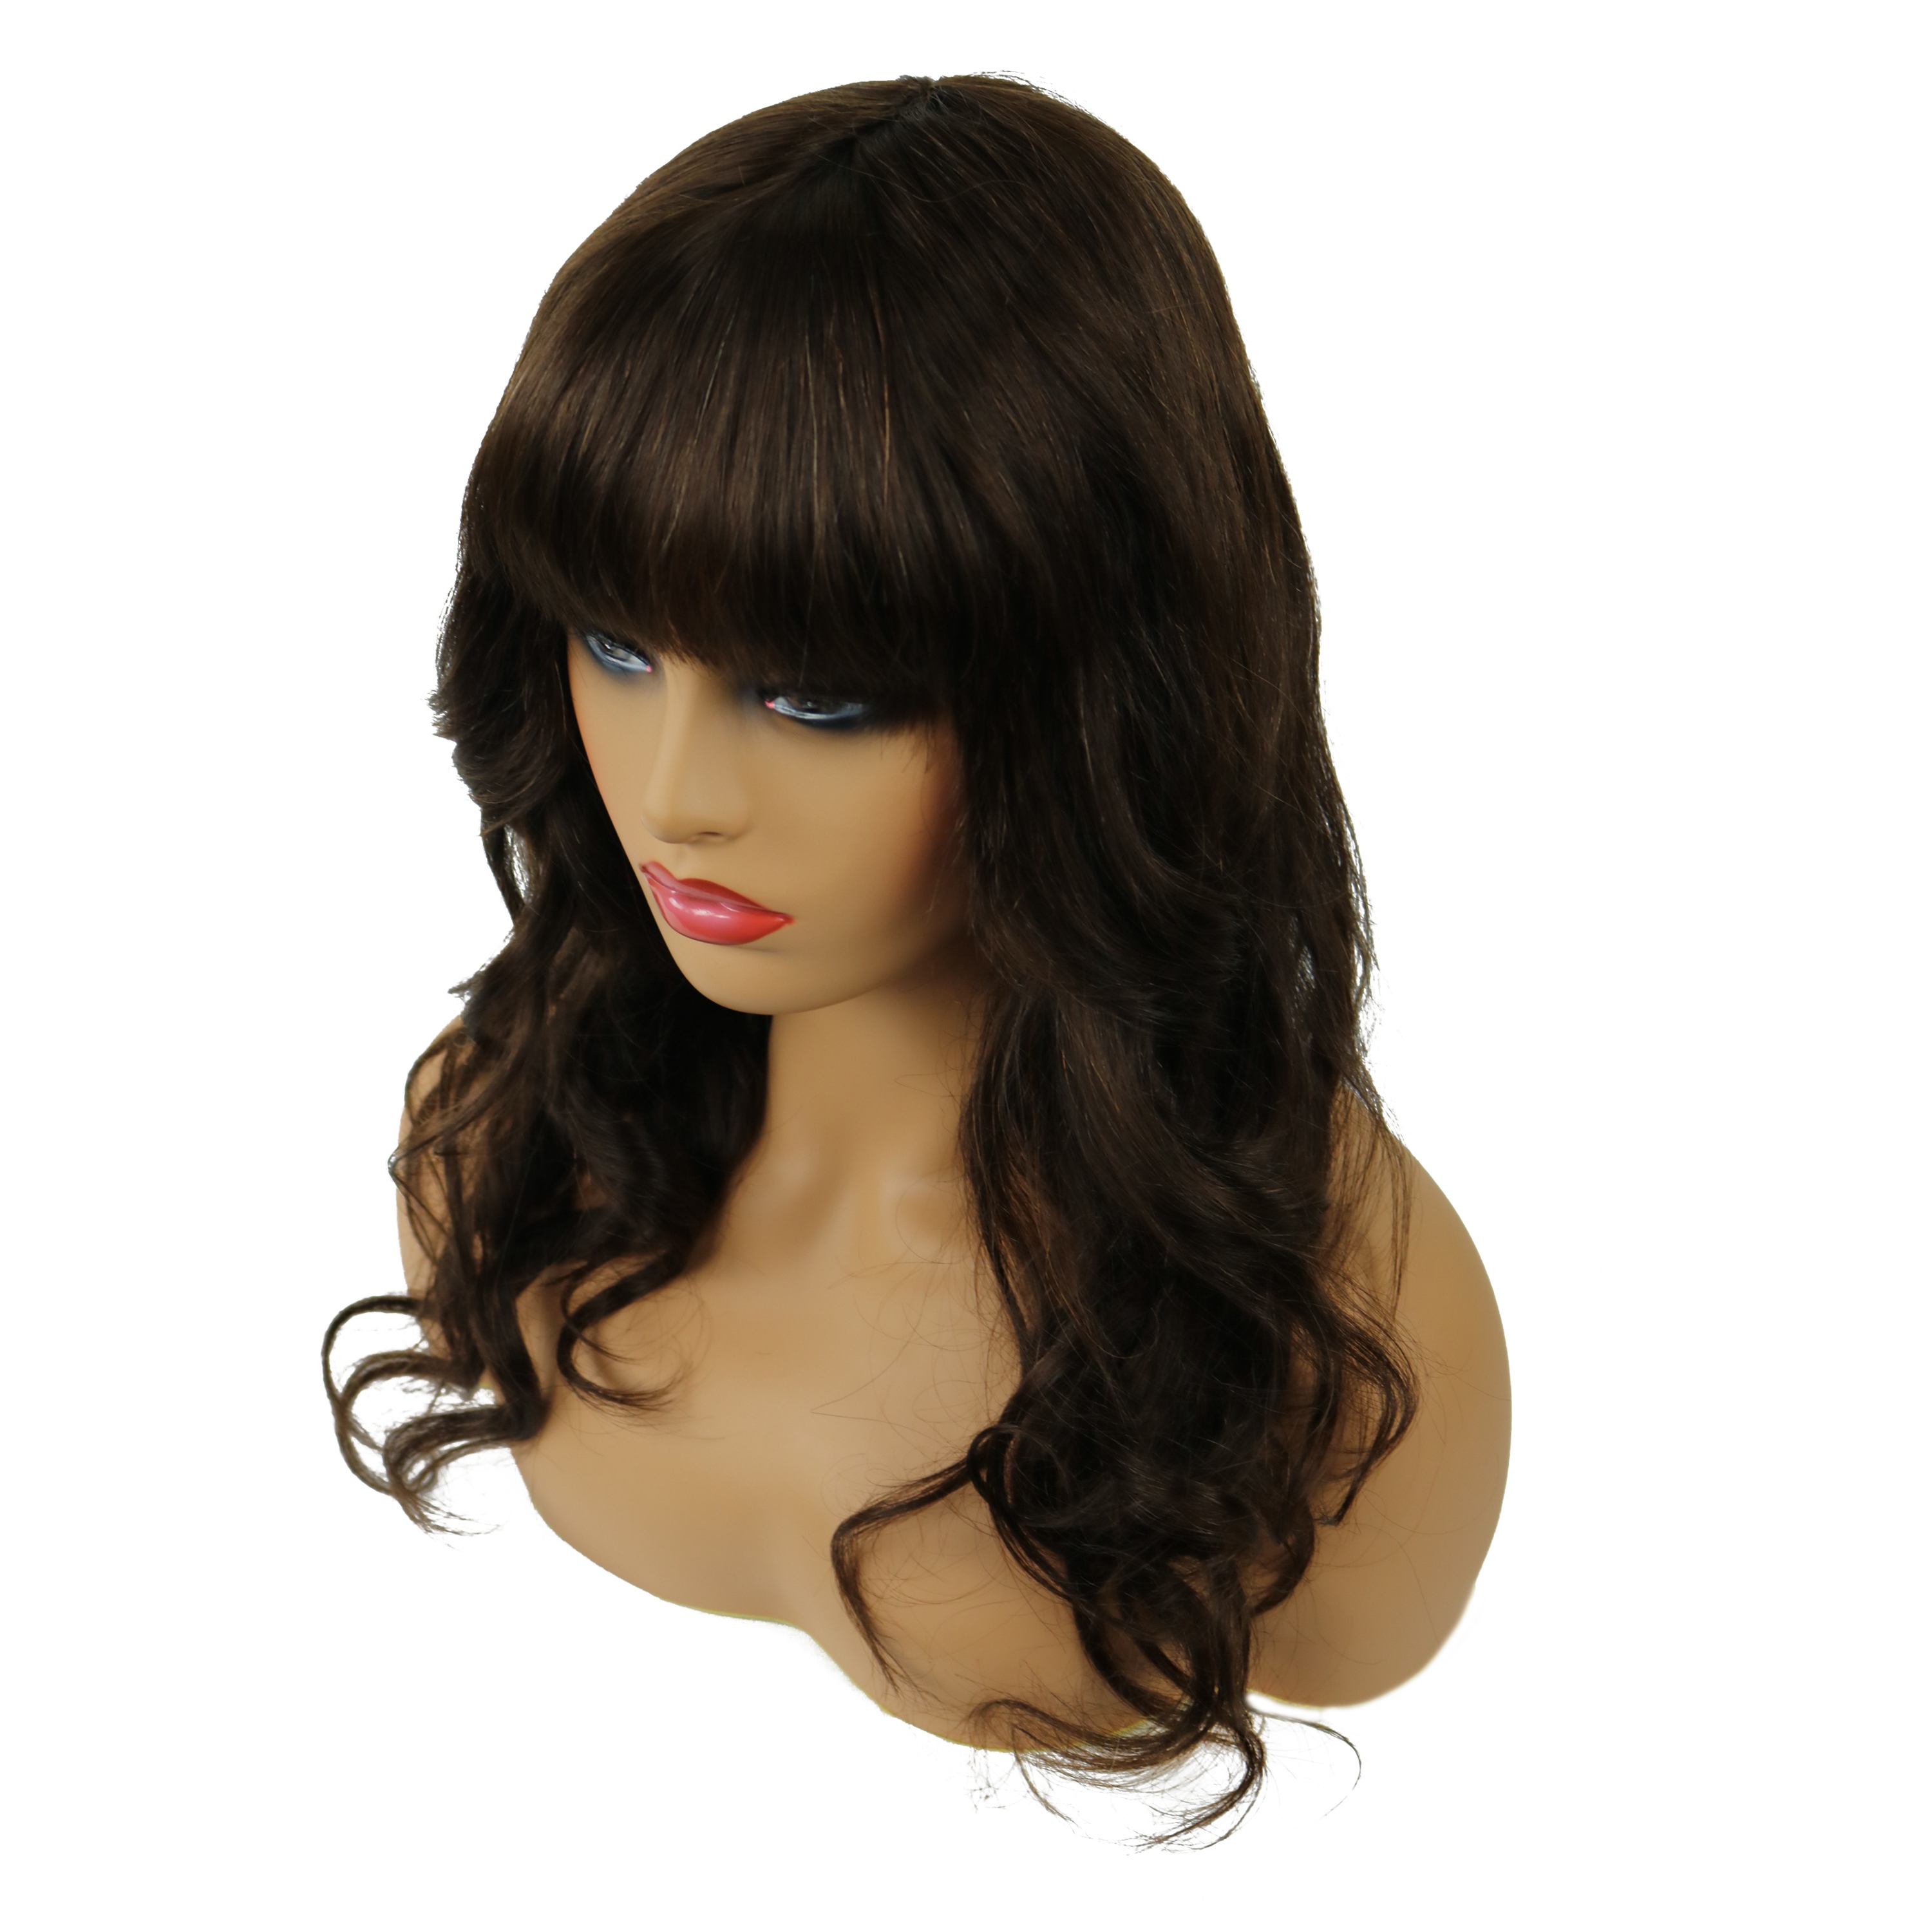 Natural Wave Capless Wig With Full Bangs 18 Inches 100% Human Hair Wig